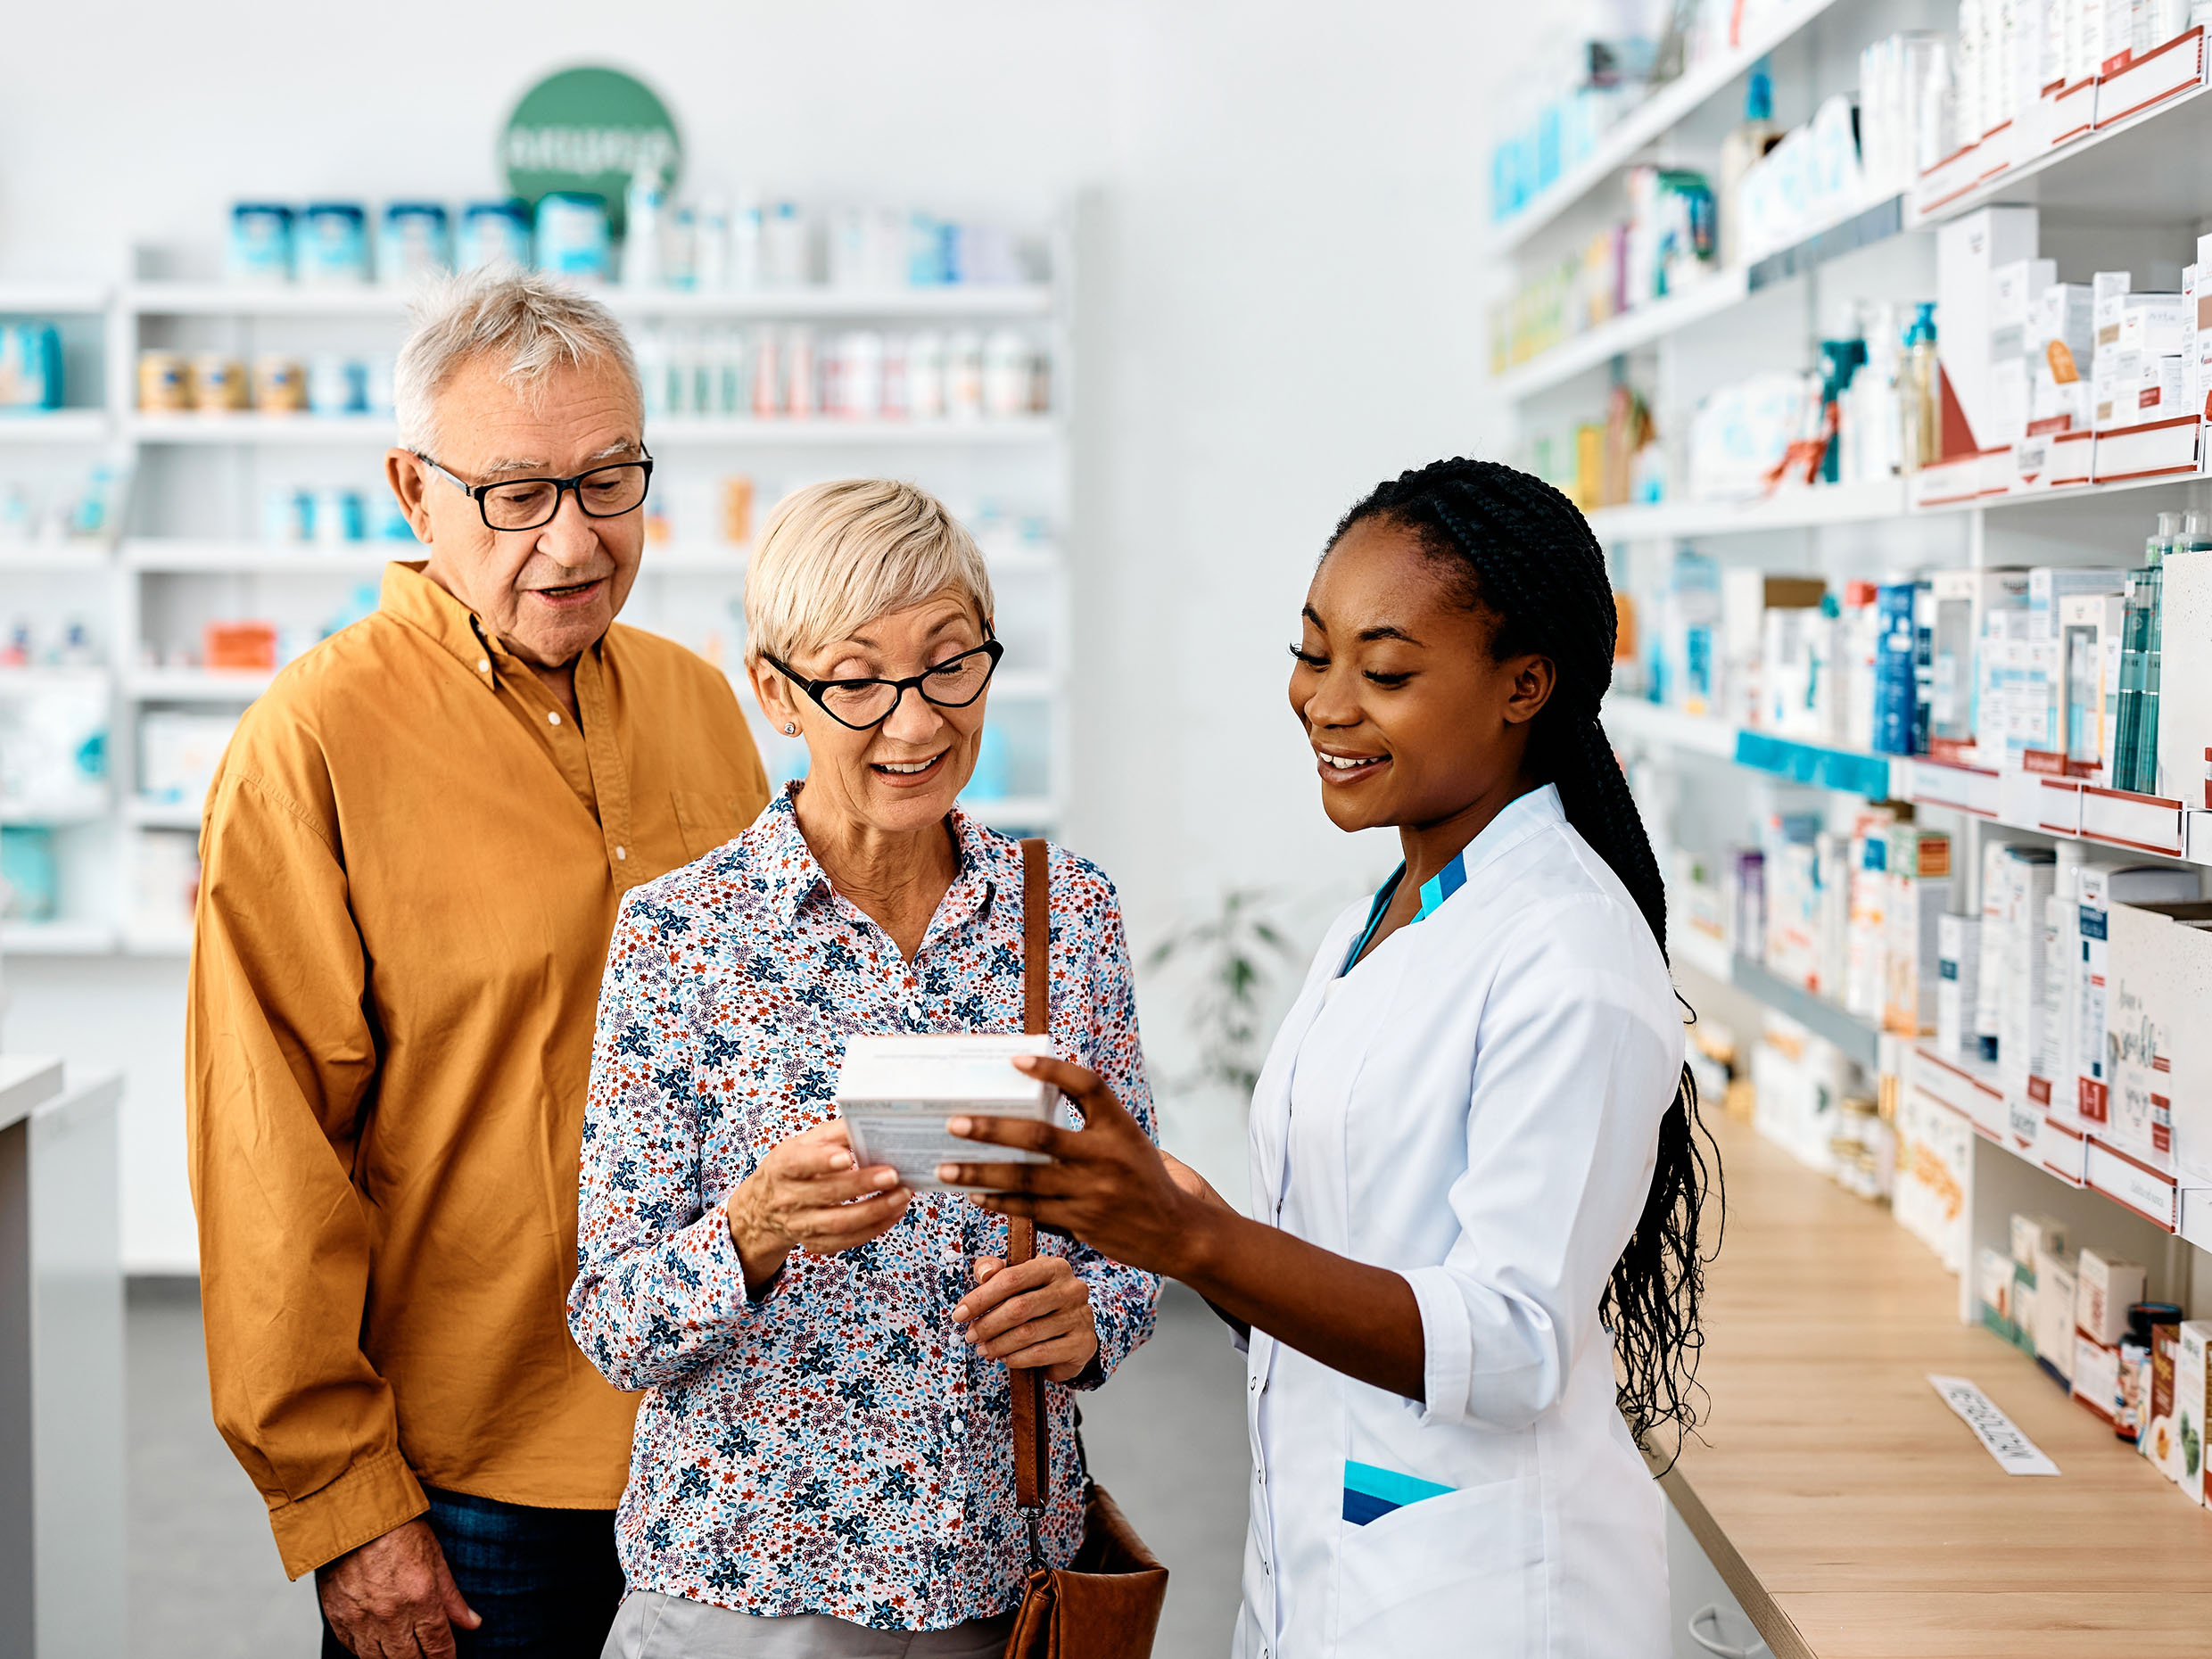 A happy female pharmacy assistant helping seniors in a community drugstore.